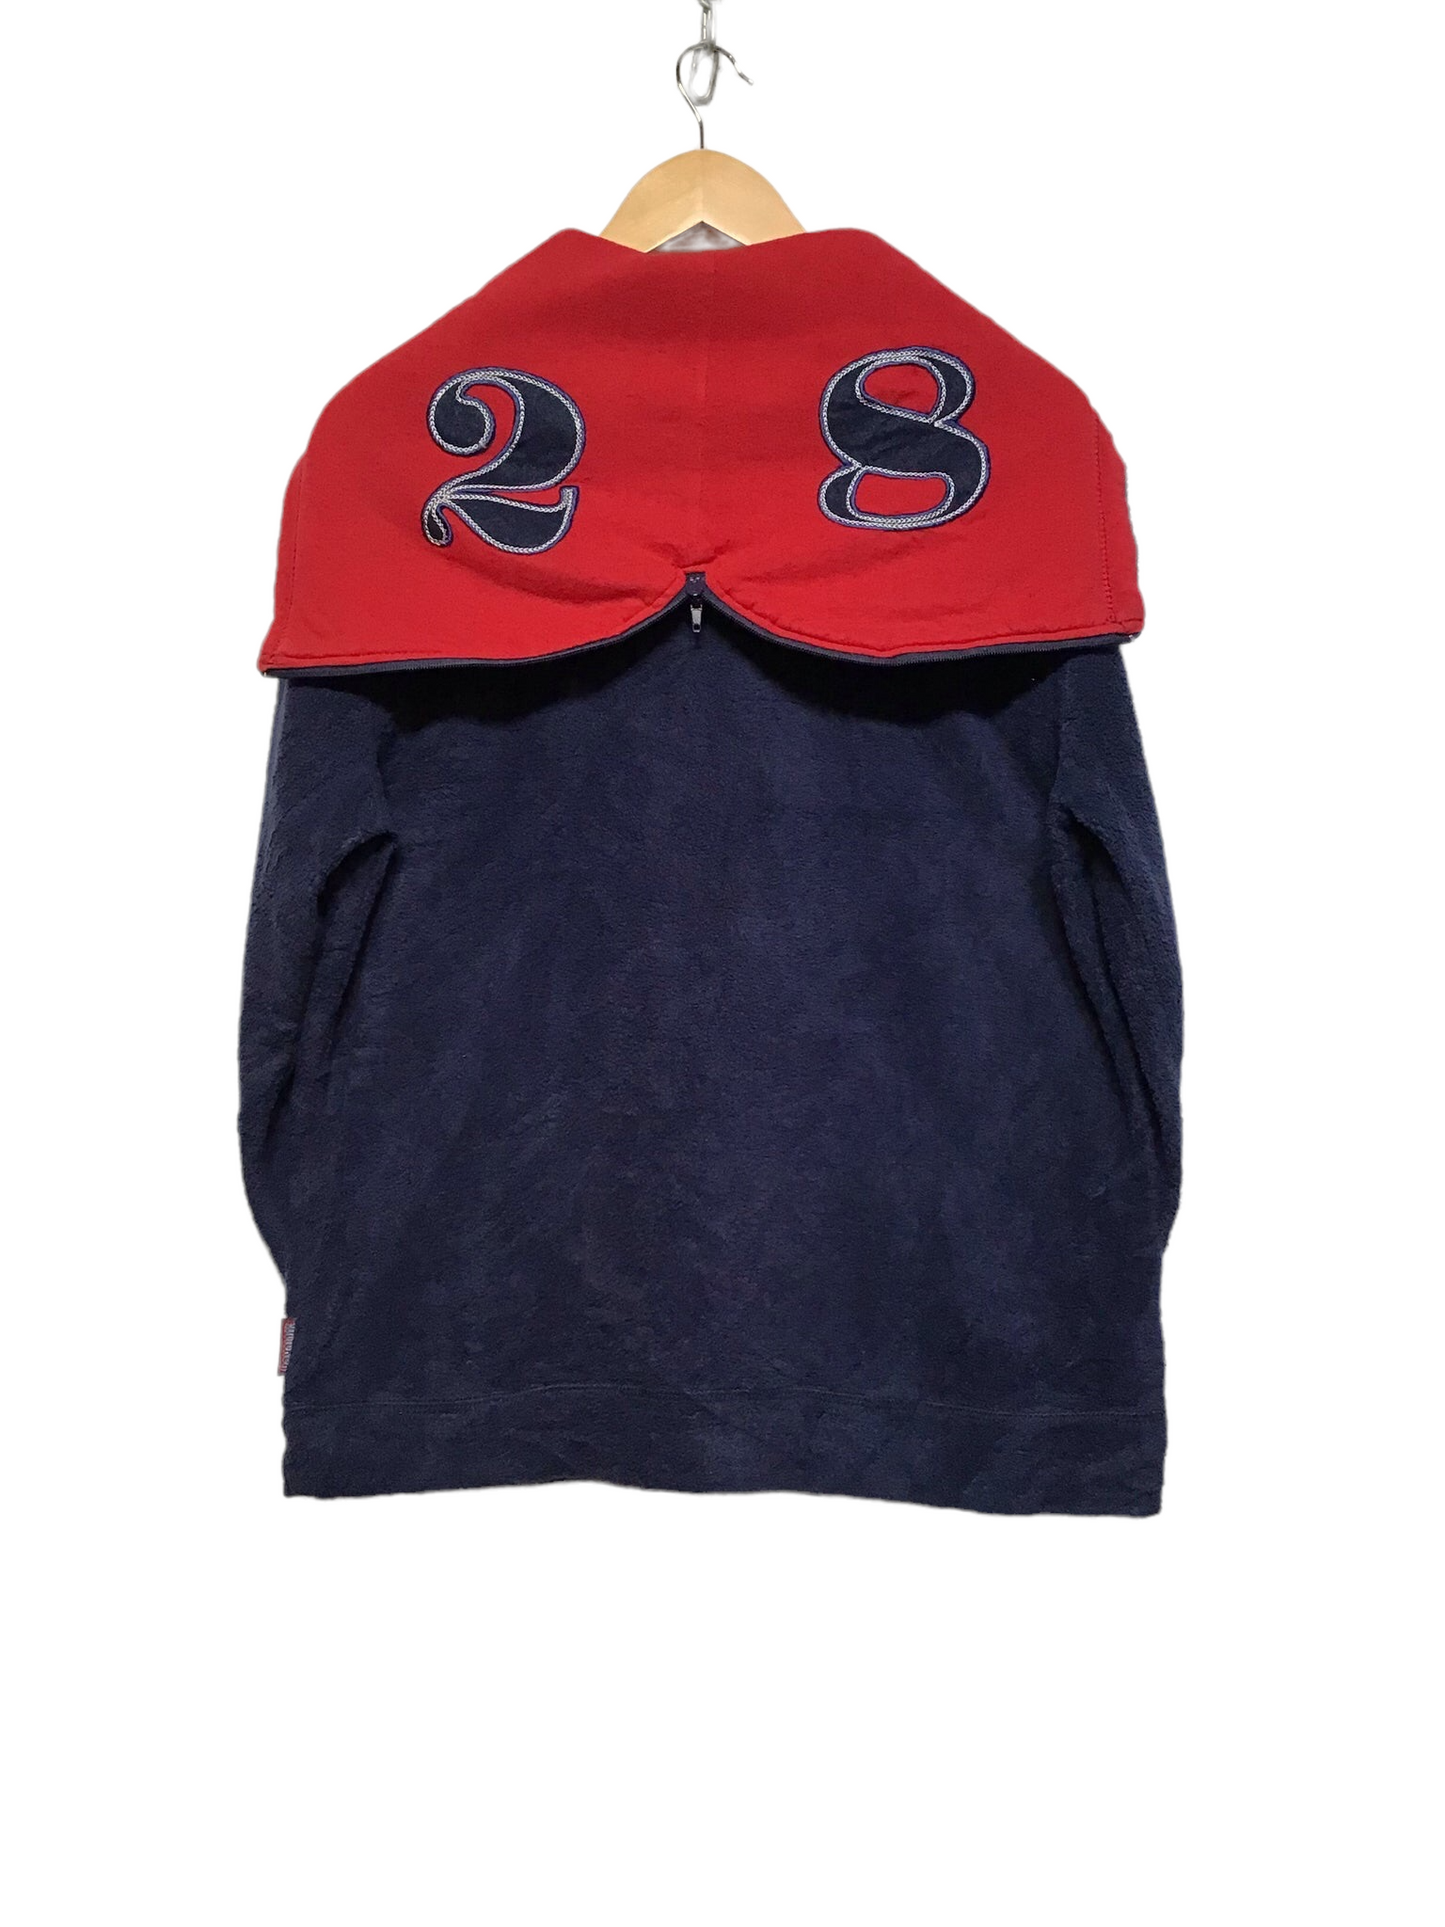 Micky Mouse Navy And Red Zip Up Fleece (Size L)